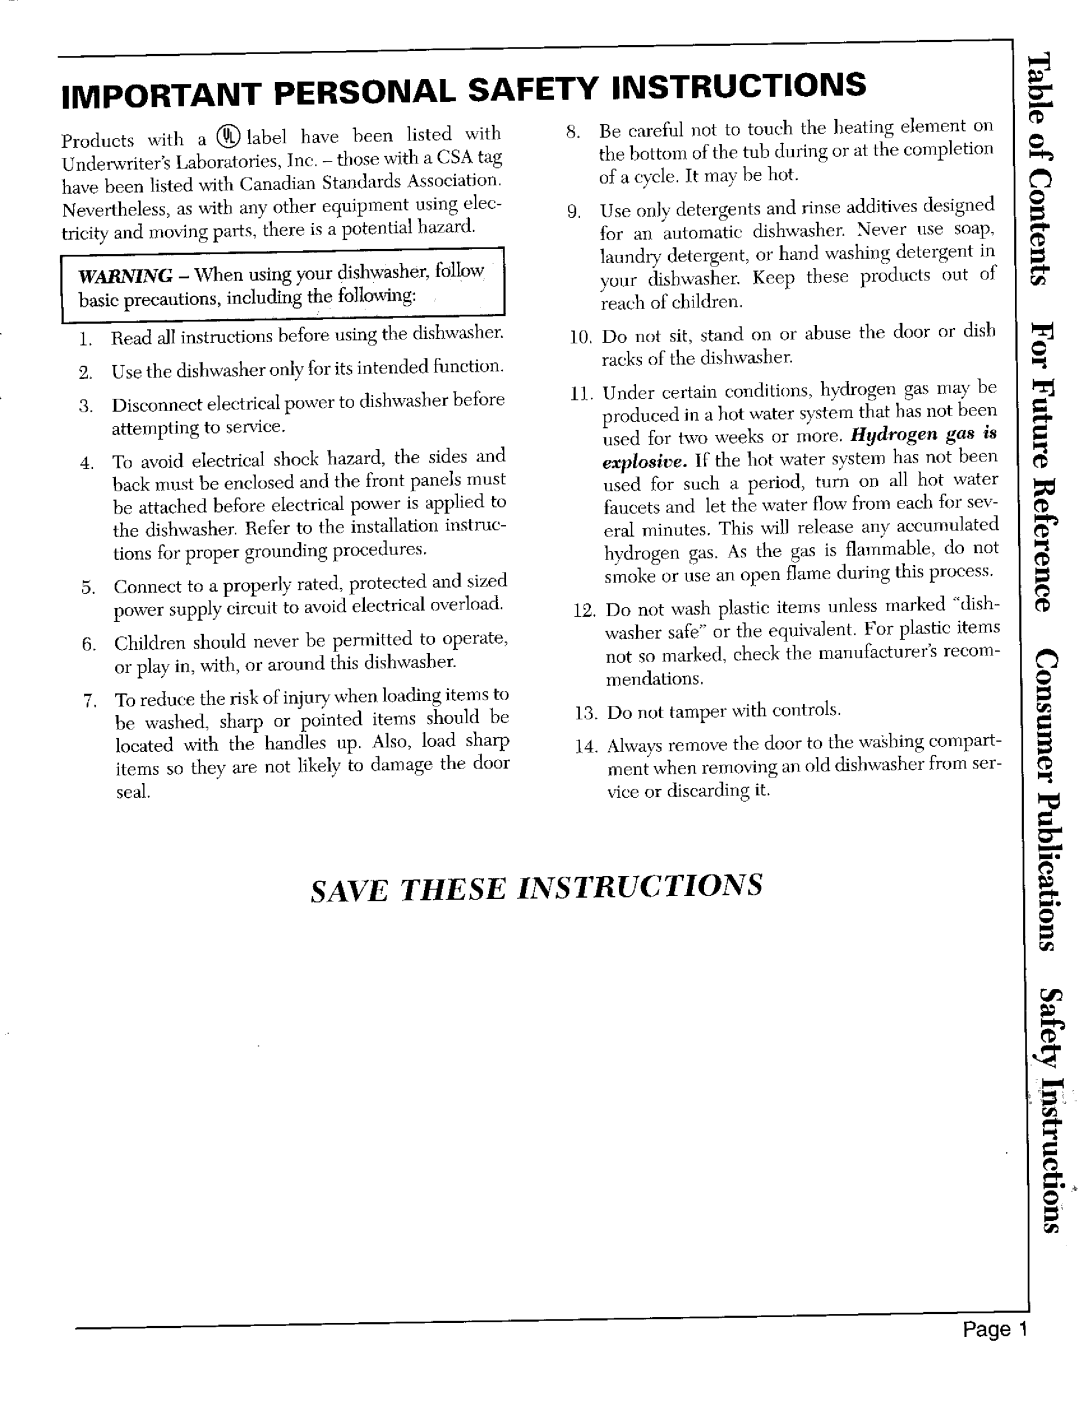 Maytag 9962 warranty Important Personal Safety Instructions, Page, Save These Instructions 